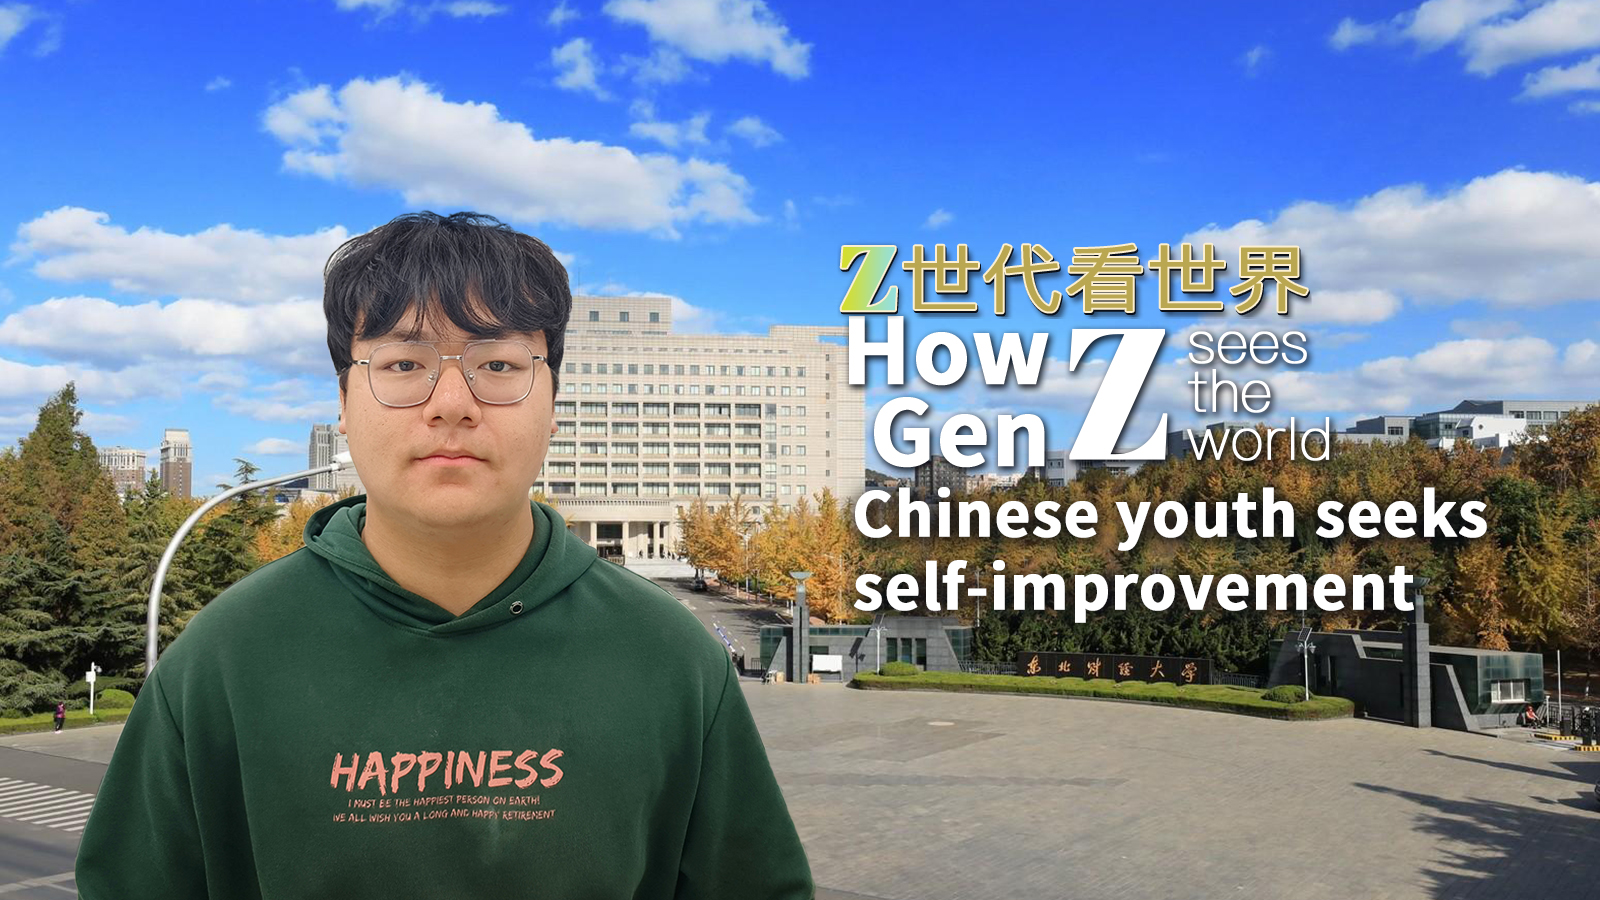 How Gen Z sees the world: Chinese youth seeks self-improvement